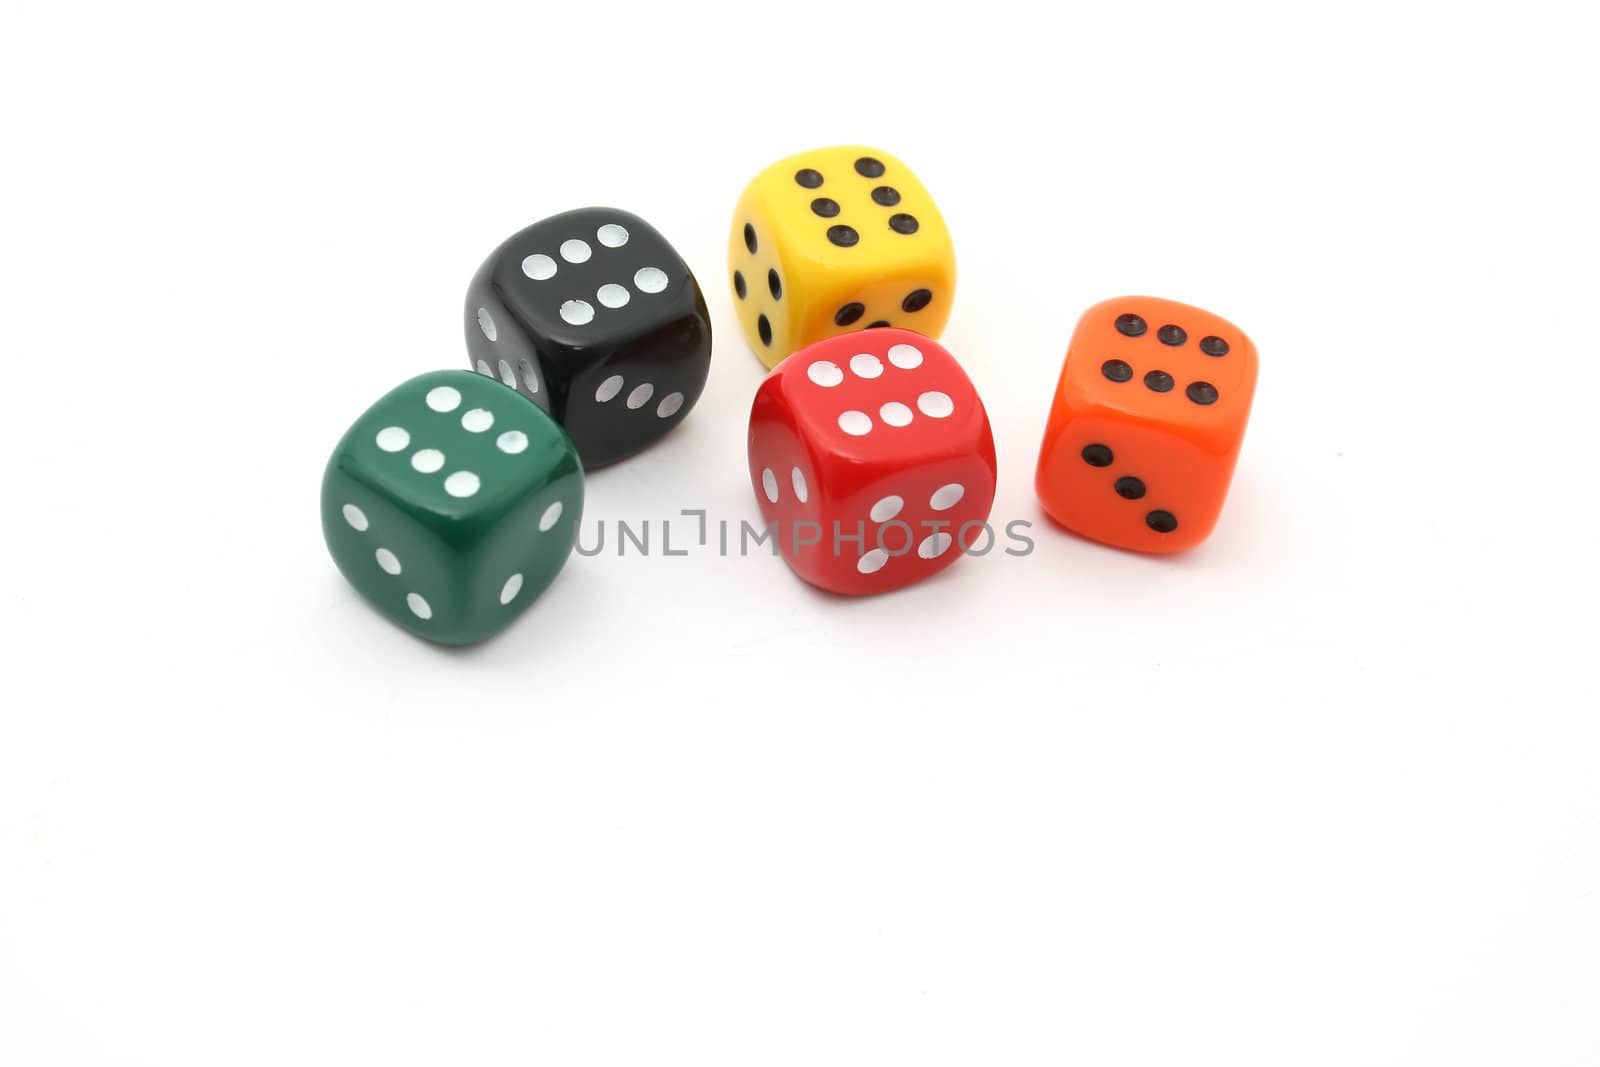 fice dice showing a 6 on white background